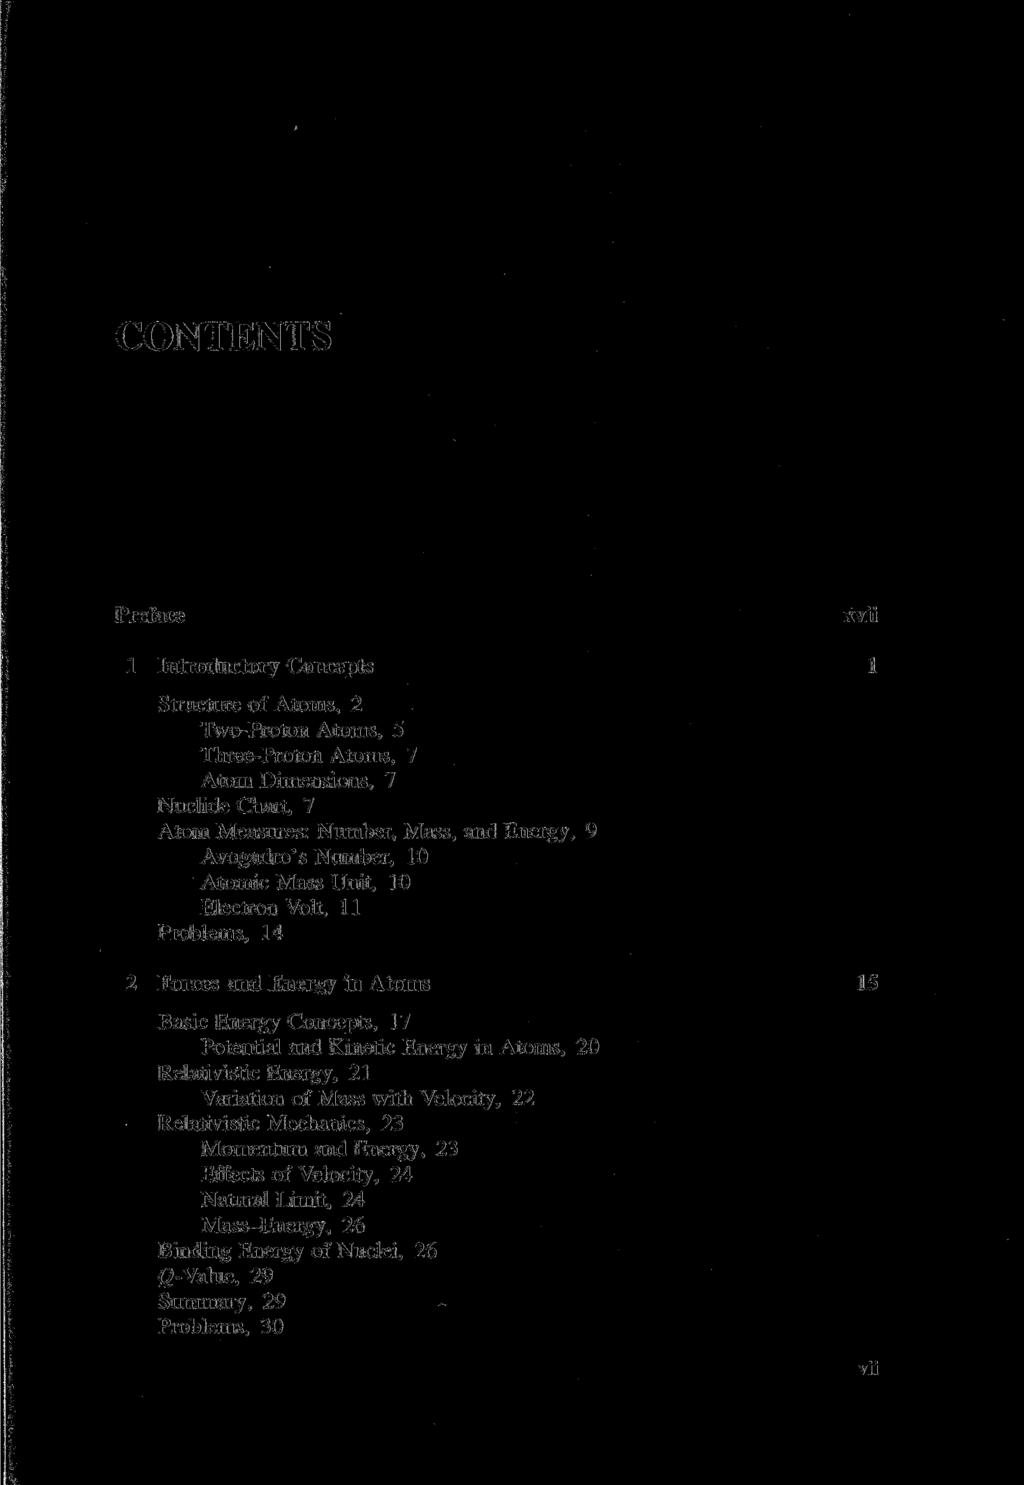 CONTENTS Preface 1 Introductory Concepts Structure of Atoms, 2 Two-Proton Atoms, 5 Three-Proton Atoms, 7 Atom Dimensions, 7 Nuclide Chart, 7 Atom Measures: Number, Mass, and Energy, 9 Avogadro's